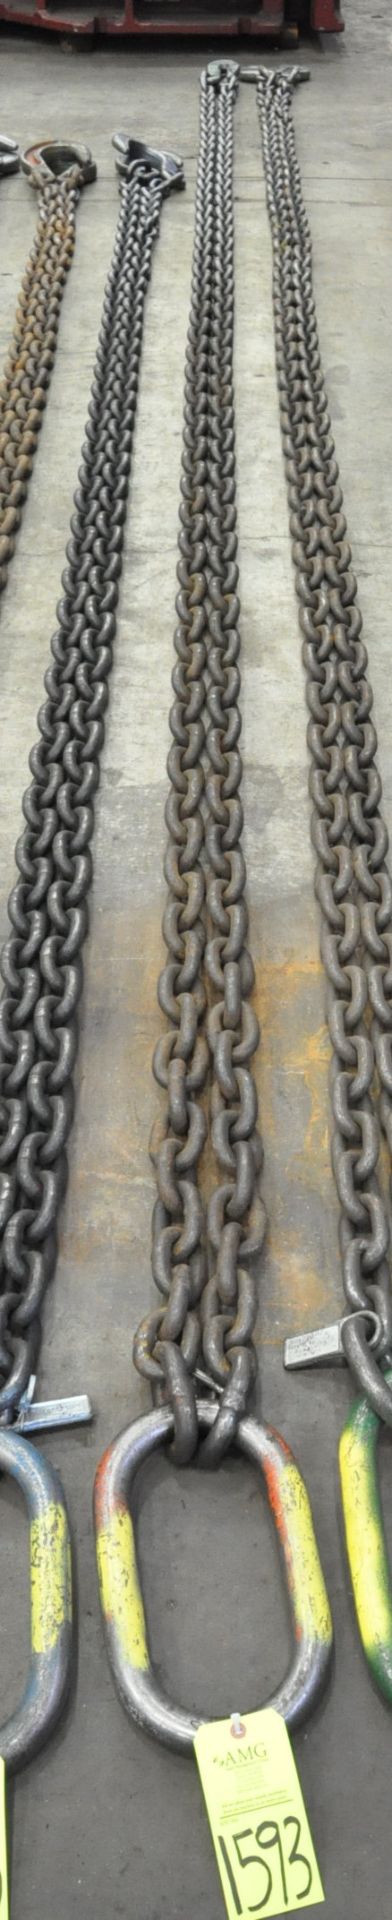 3/4" Link x 20' Long 2-Hook Chain Sling, Cert Tag, (G-21), (Yellow Tag)